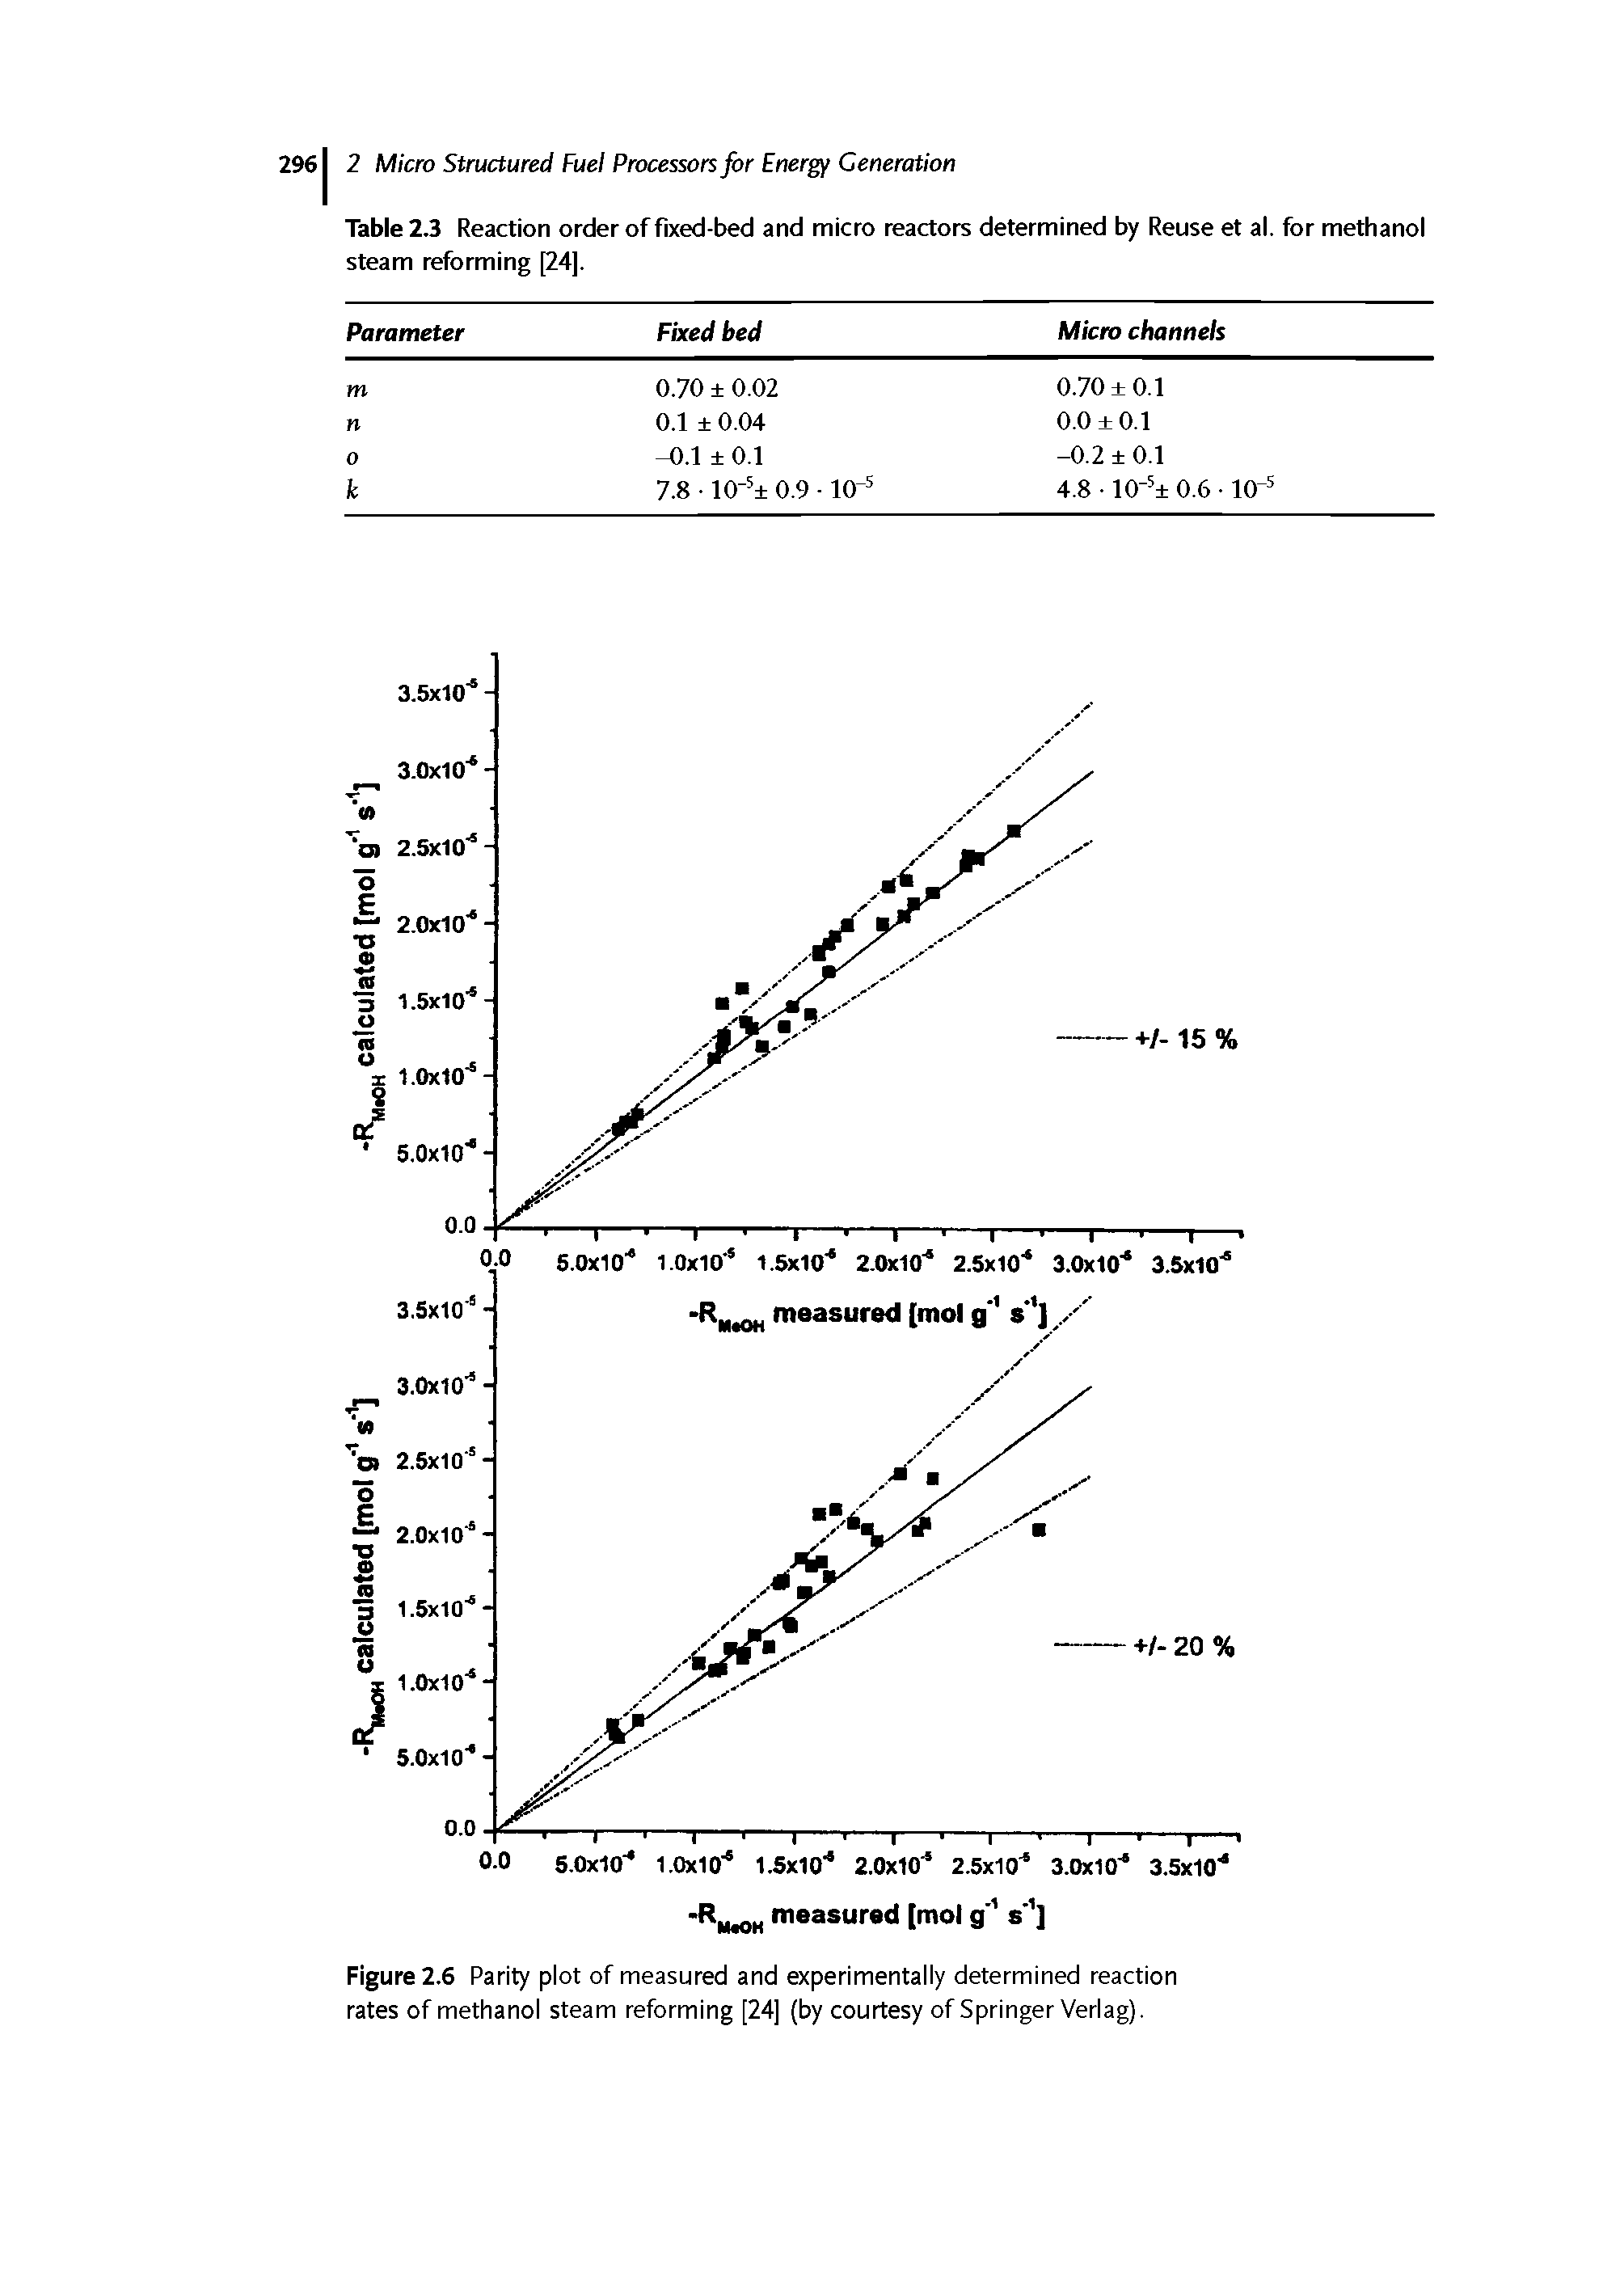 Figure 2.6 Parity plot of measured and experimentally determined reaction rates of methanol steam reforming [24] (by courtesy of Springer Verlag).